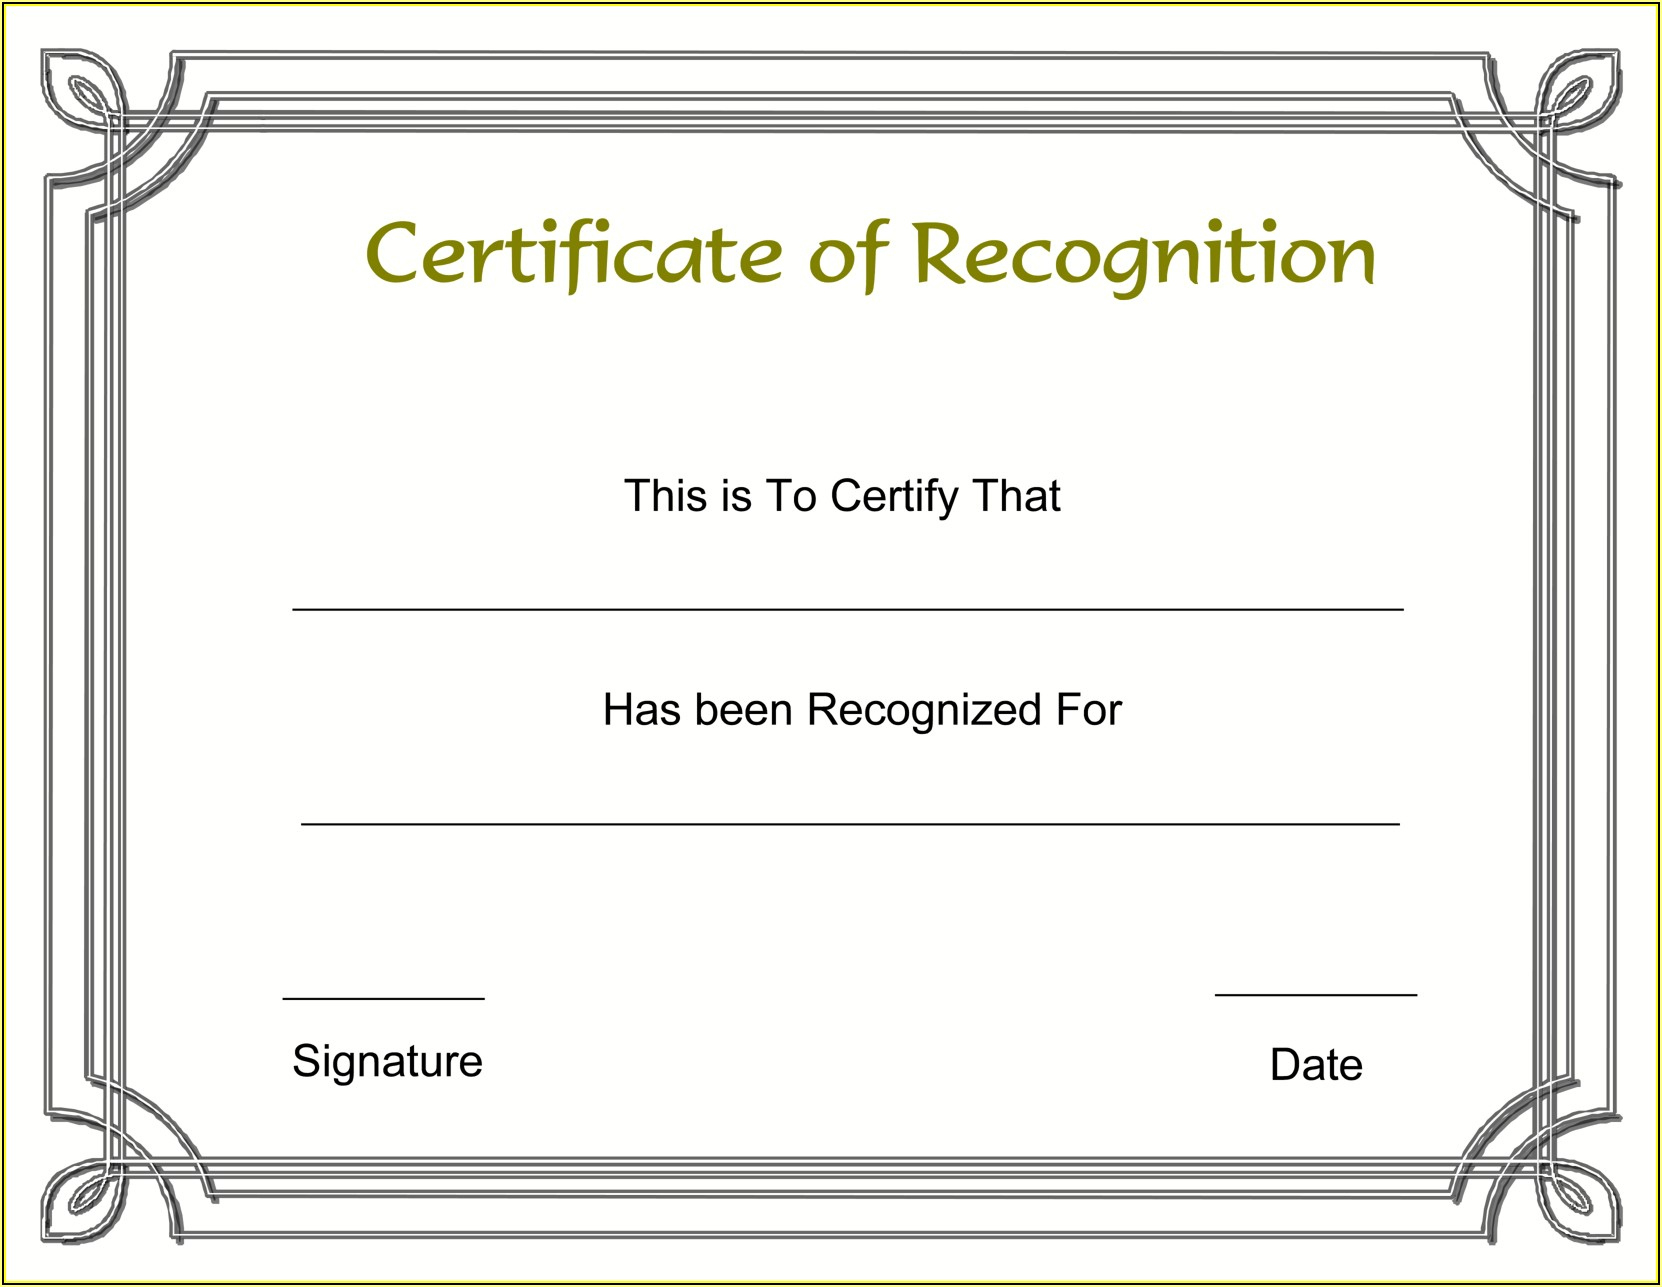 Employee Recognition Certificates Templates Free - Template 2 : Resume within New Employee Recognition Certificates Templates Free